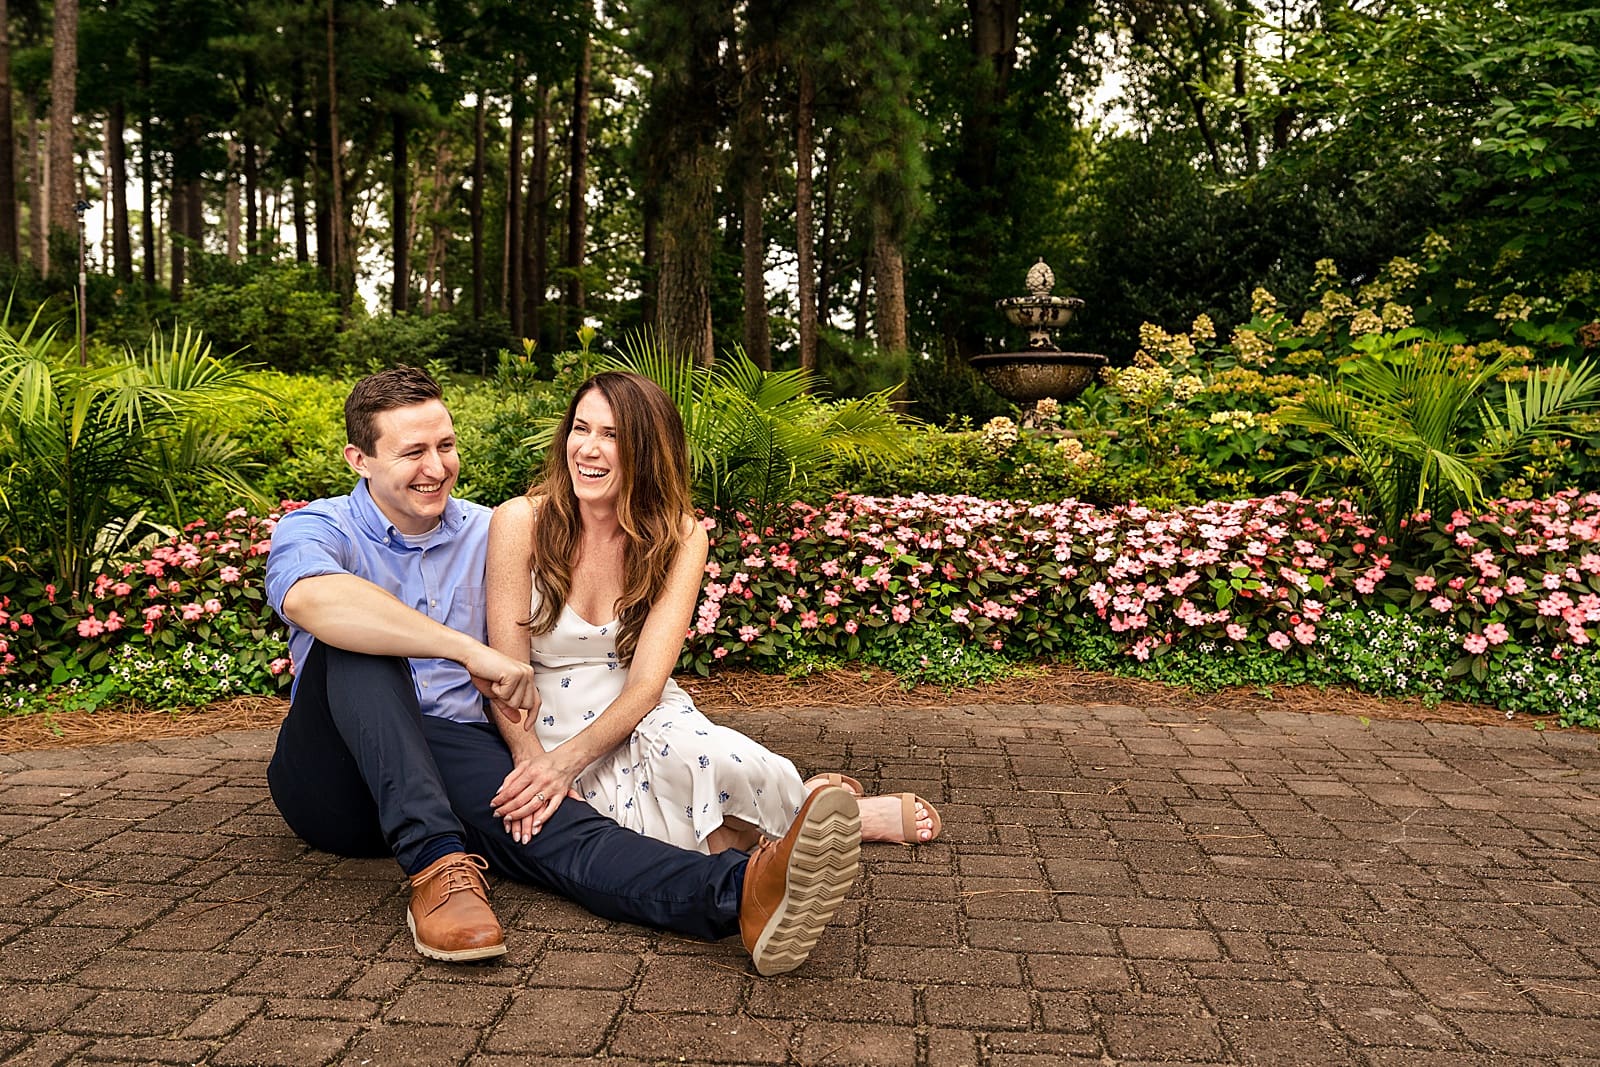 Raleigh engagement photographer with colorful images